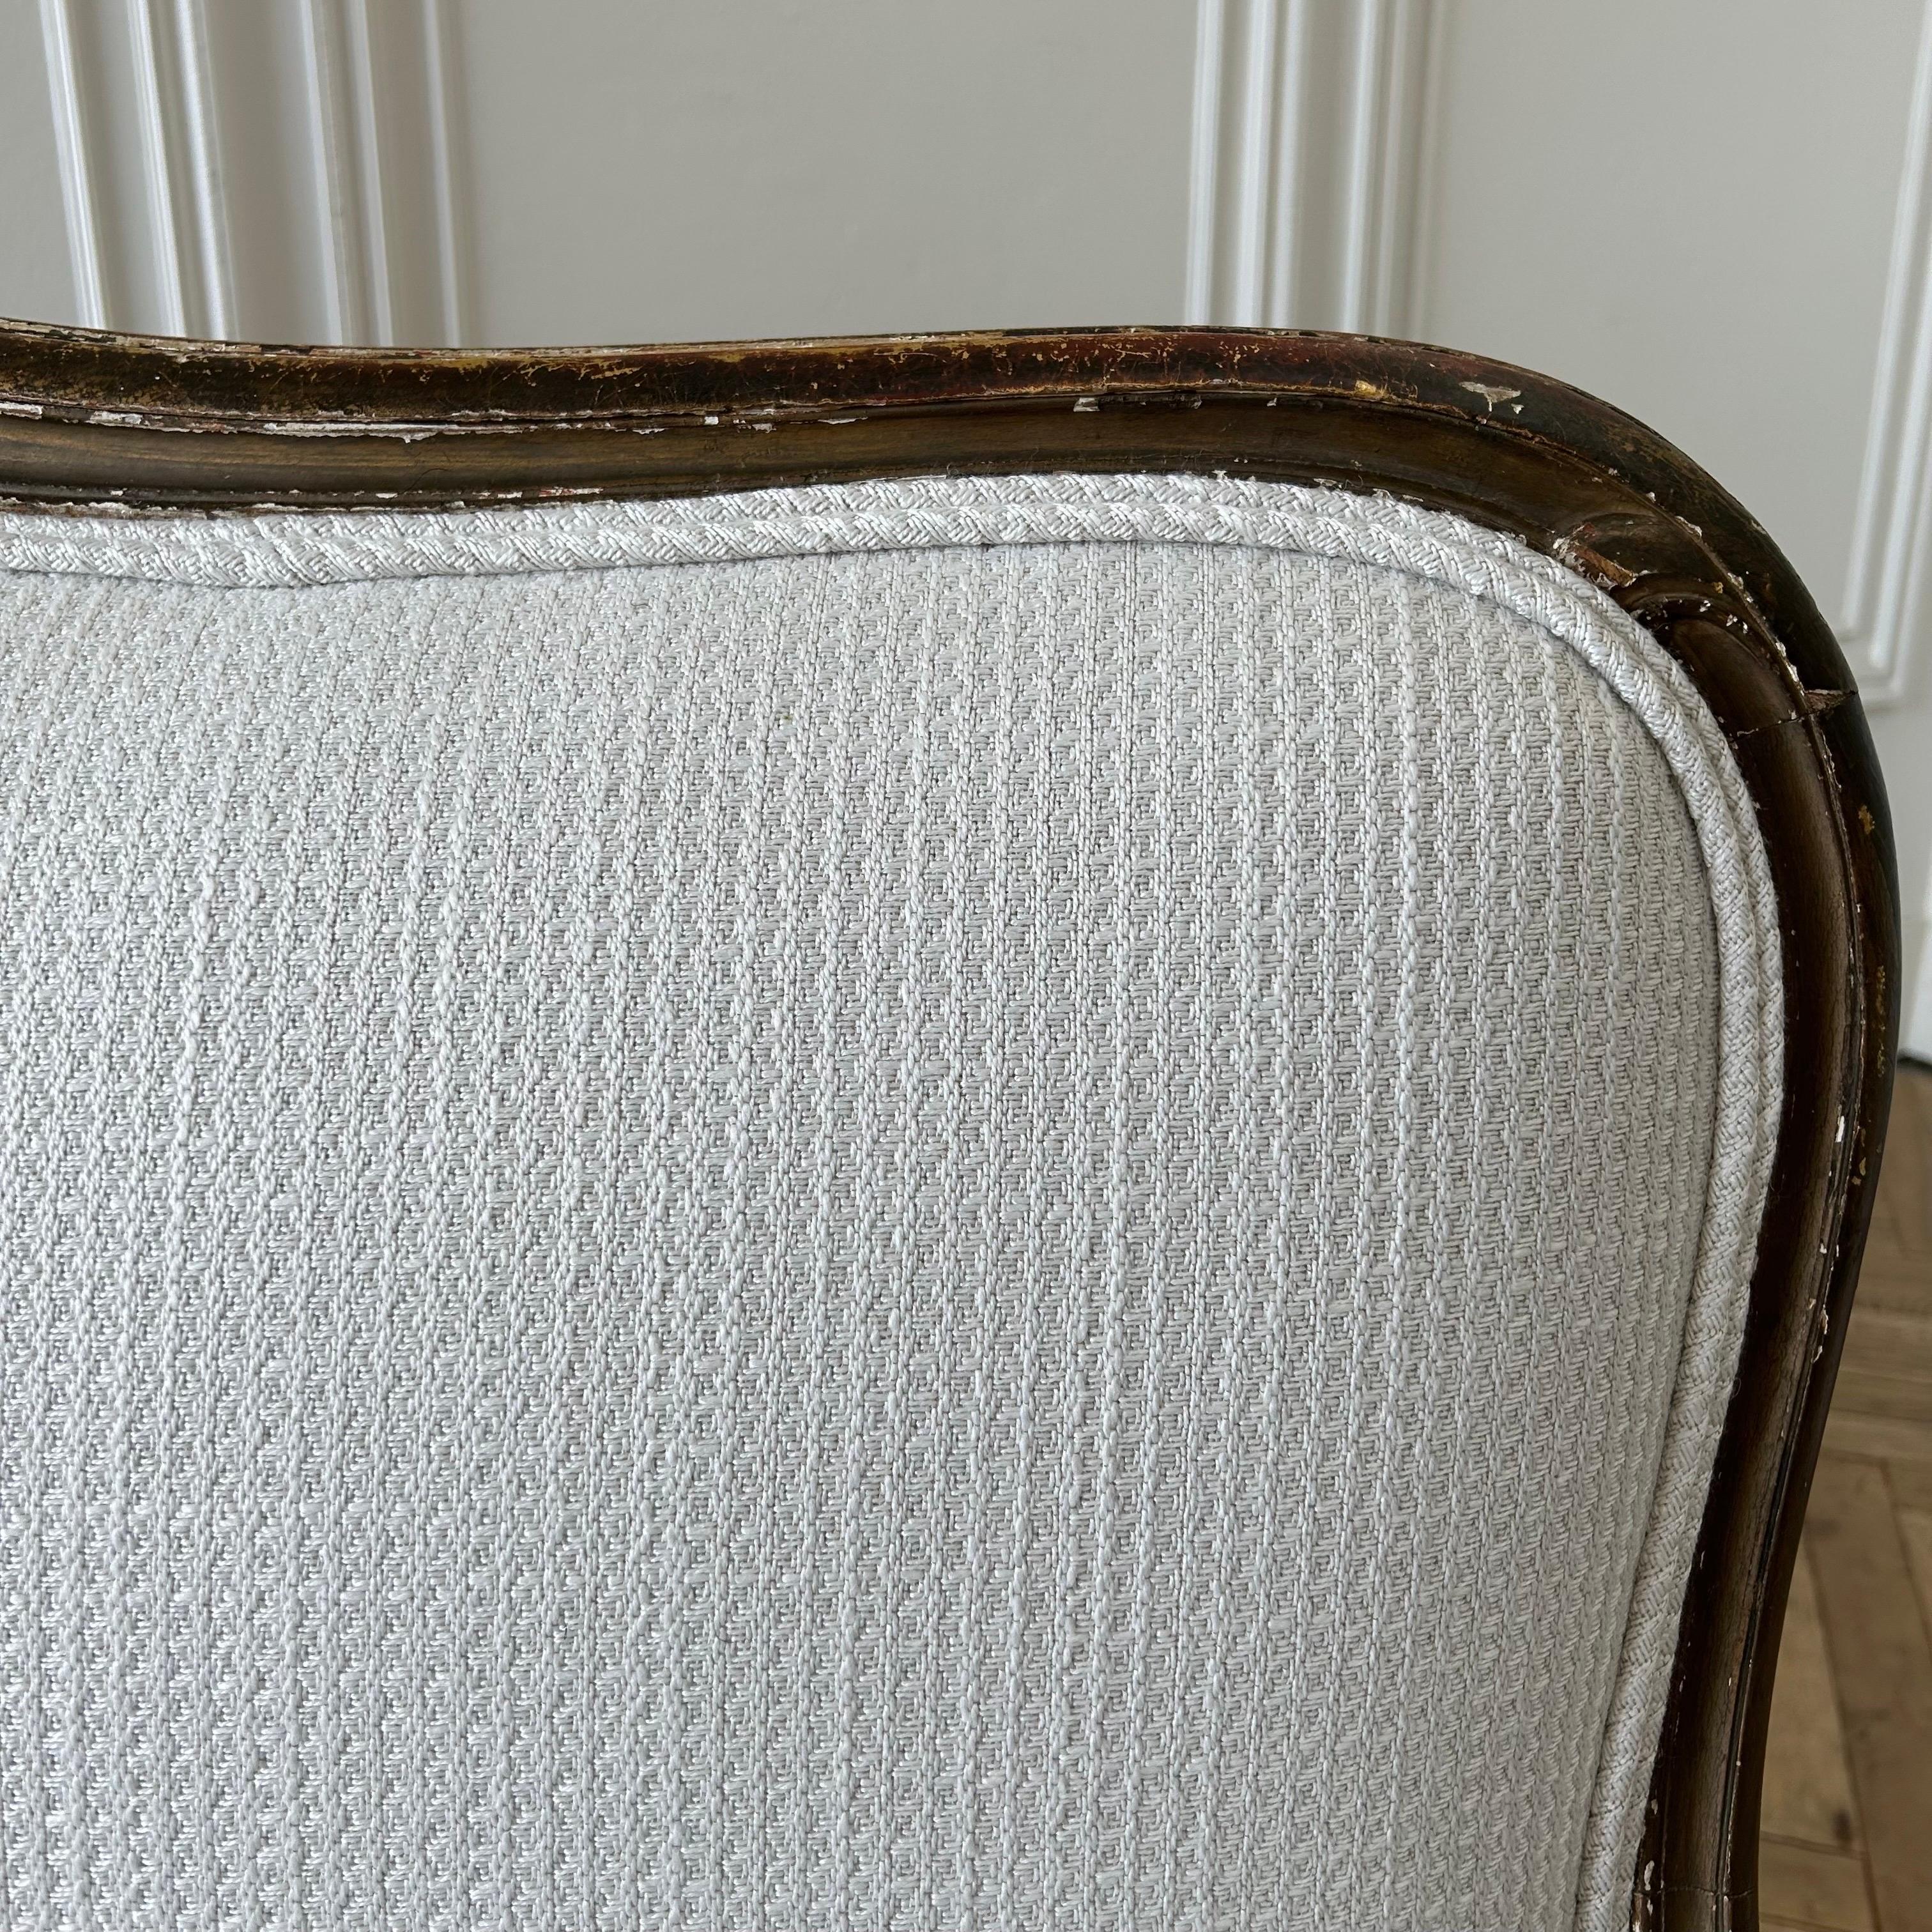 Antique French Gilt Wood Settee Upholstered in Antique White Wool and Cashmere For Sale 9